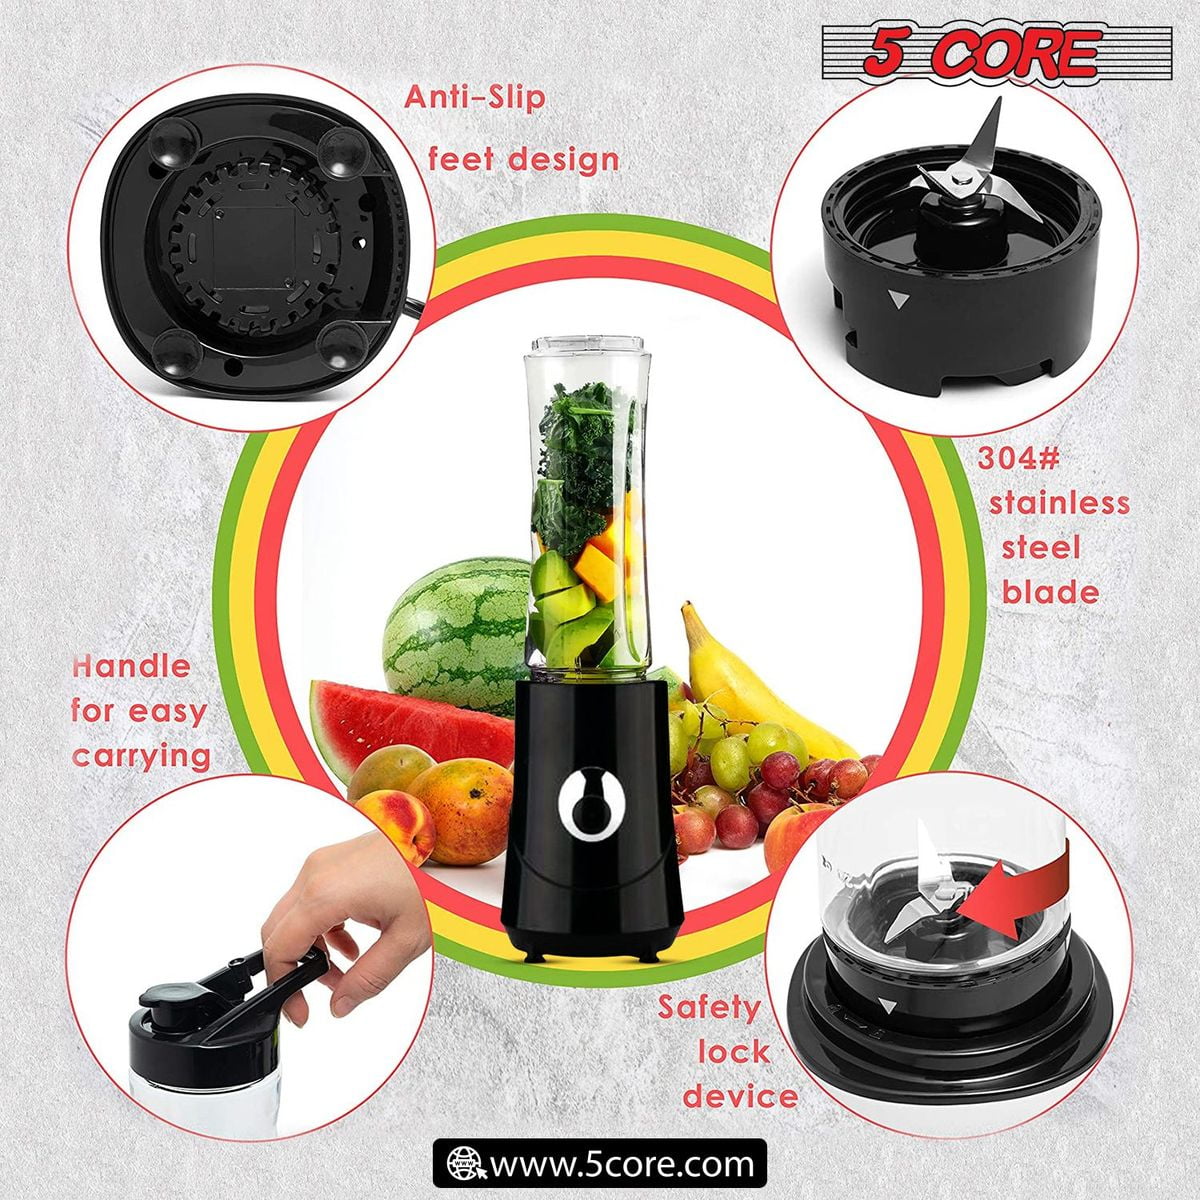 Dropship 5 Core Smoothie Blender Personal Blender For Shakes And Smoothies  300W Powerful Food Processor With 20oz Portable Sports Bottle Single Blend  Easy To Clean BPA Free - 5C 421 to Sell